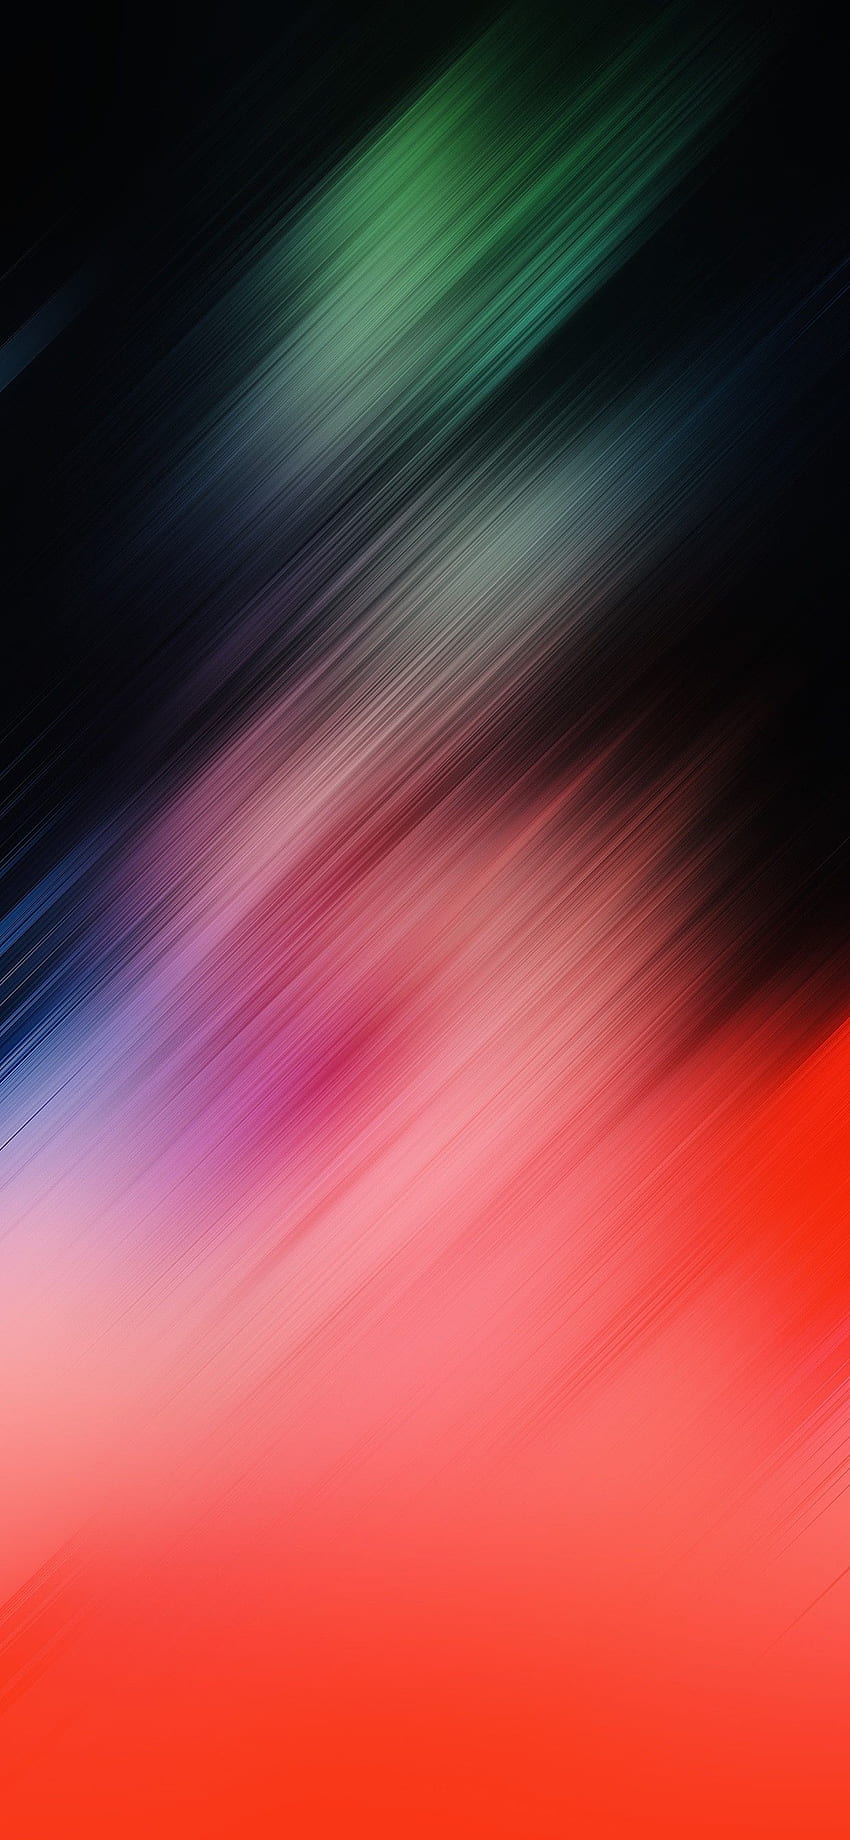 Blurry Phone - Awesome, Blurry Aesthetic HD phone wallpaper